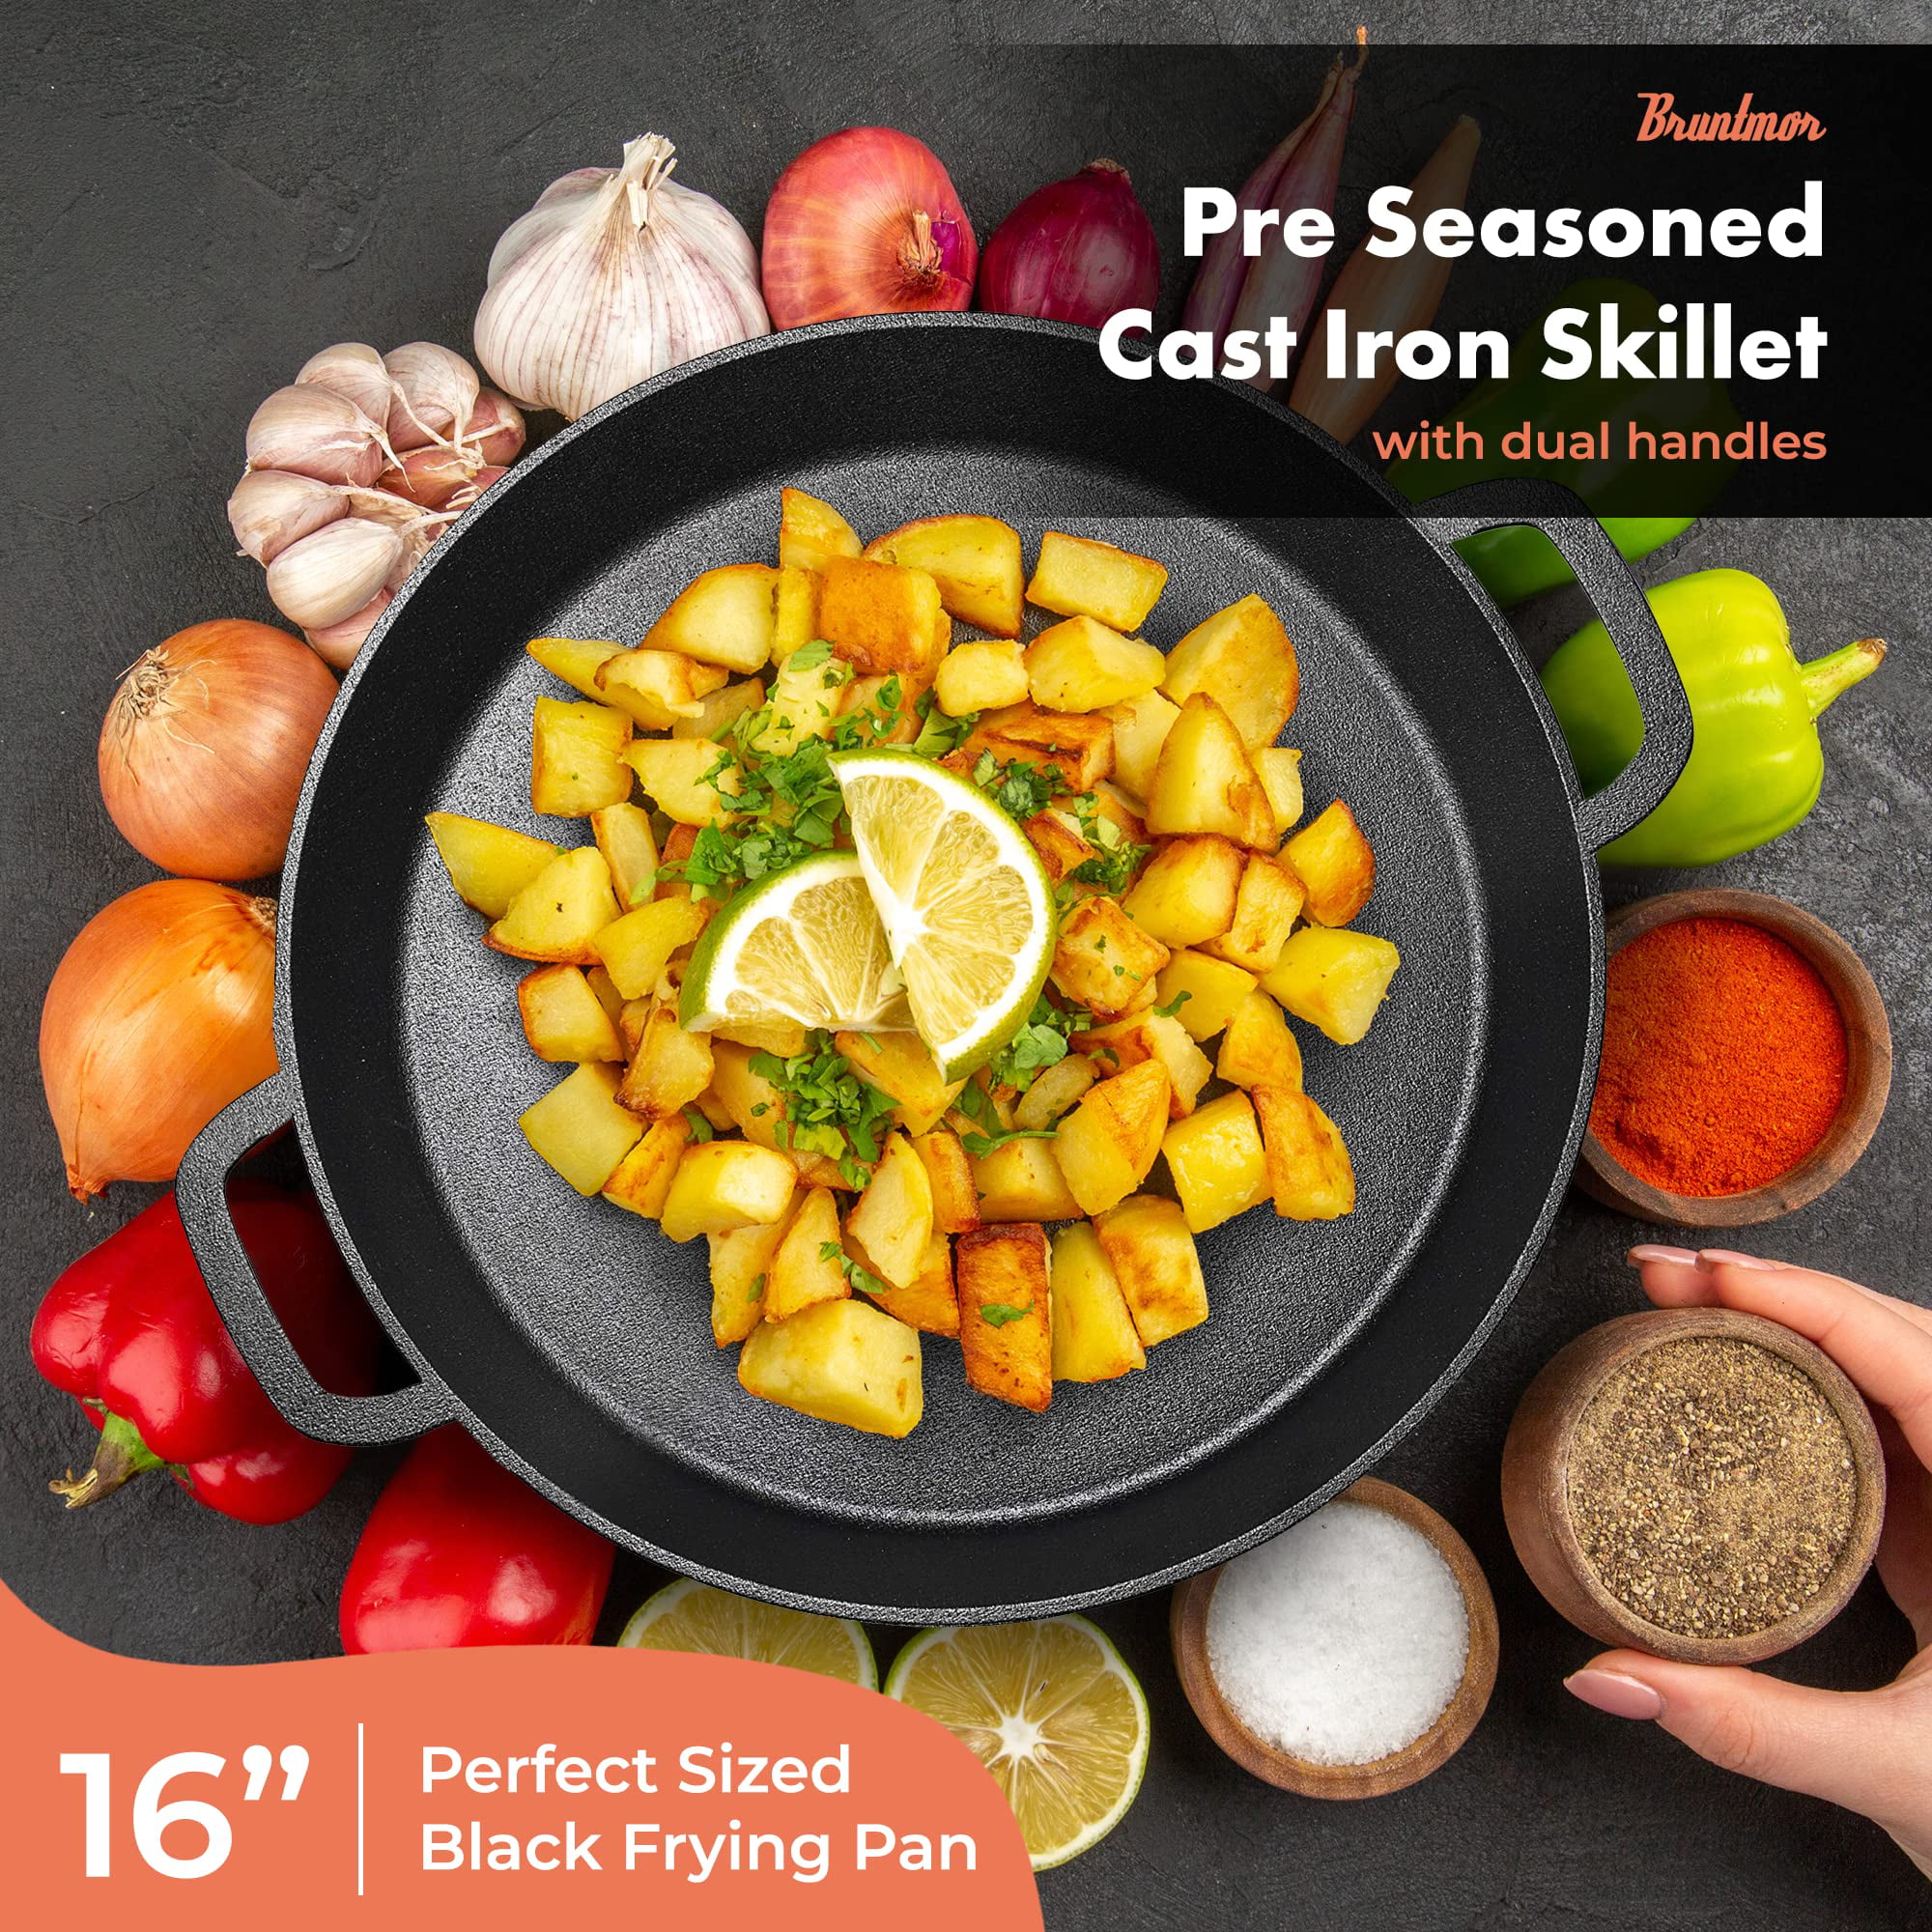 Pre-Seasoned Cast Iron Skillet, 14cm By Bruntmor - Use To Fry, Sear, Saute,  Bake, And More - Indoor/Outdoor Use - AliExpress